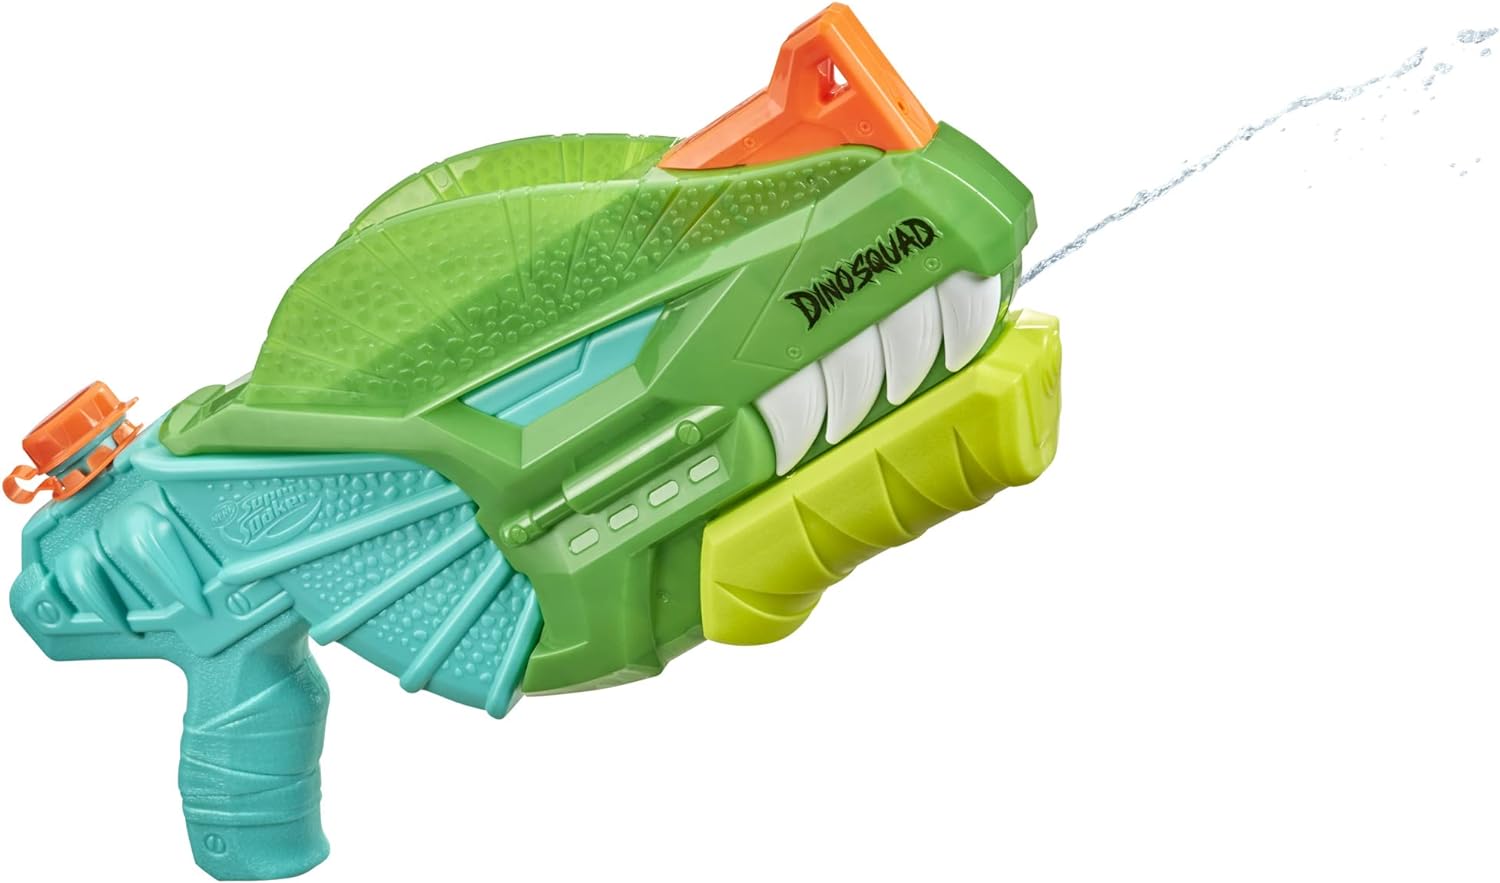 These squirt guns are HUGE! They are easy to fill, easy to maneuver, and they hold a lot of water. I purchased two, and would purchase again! They are made incredibly well.